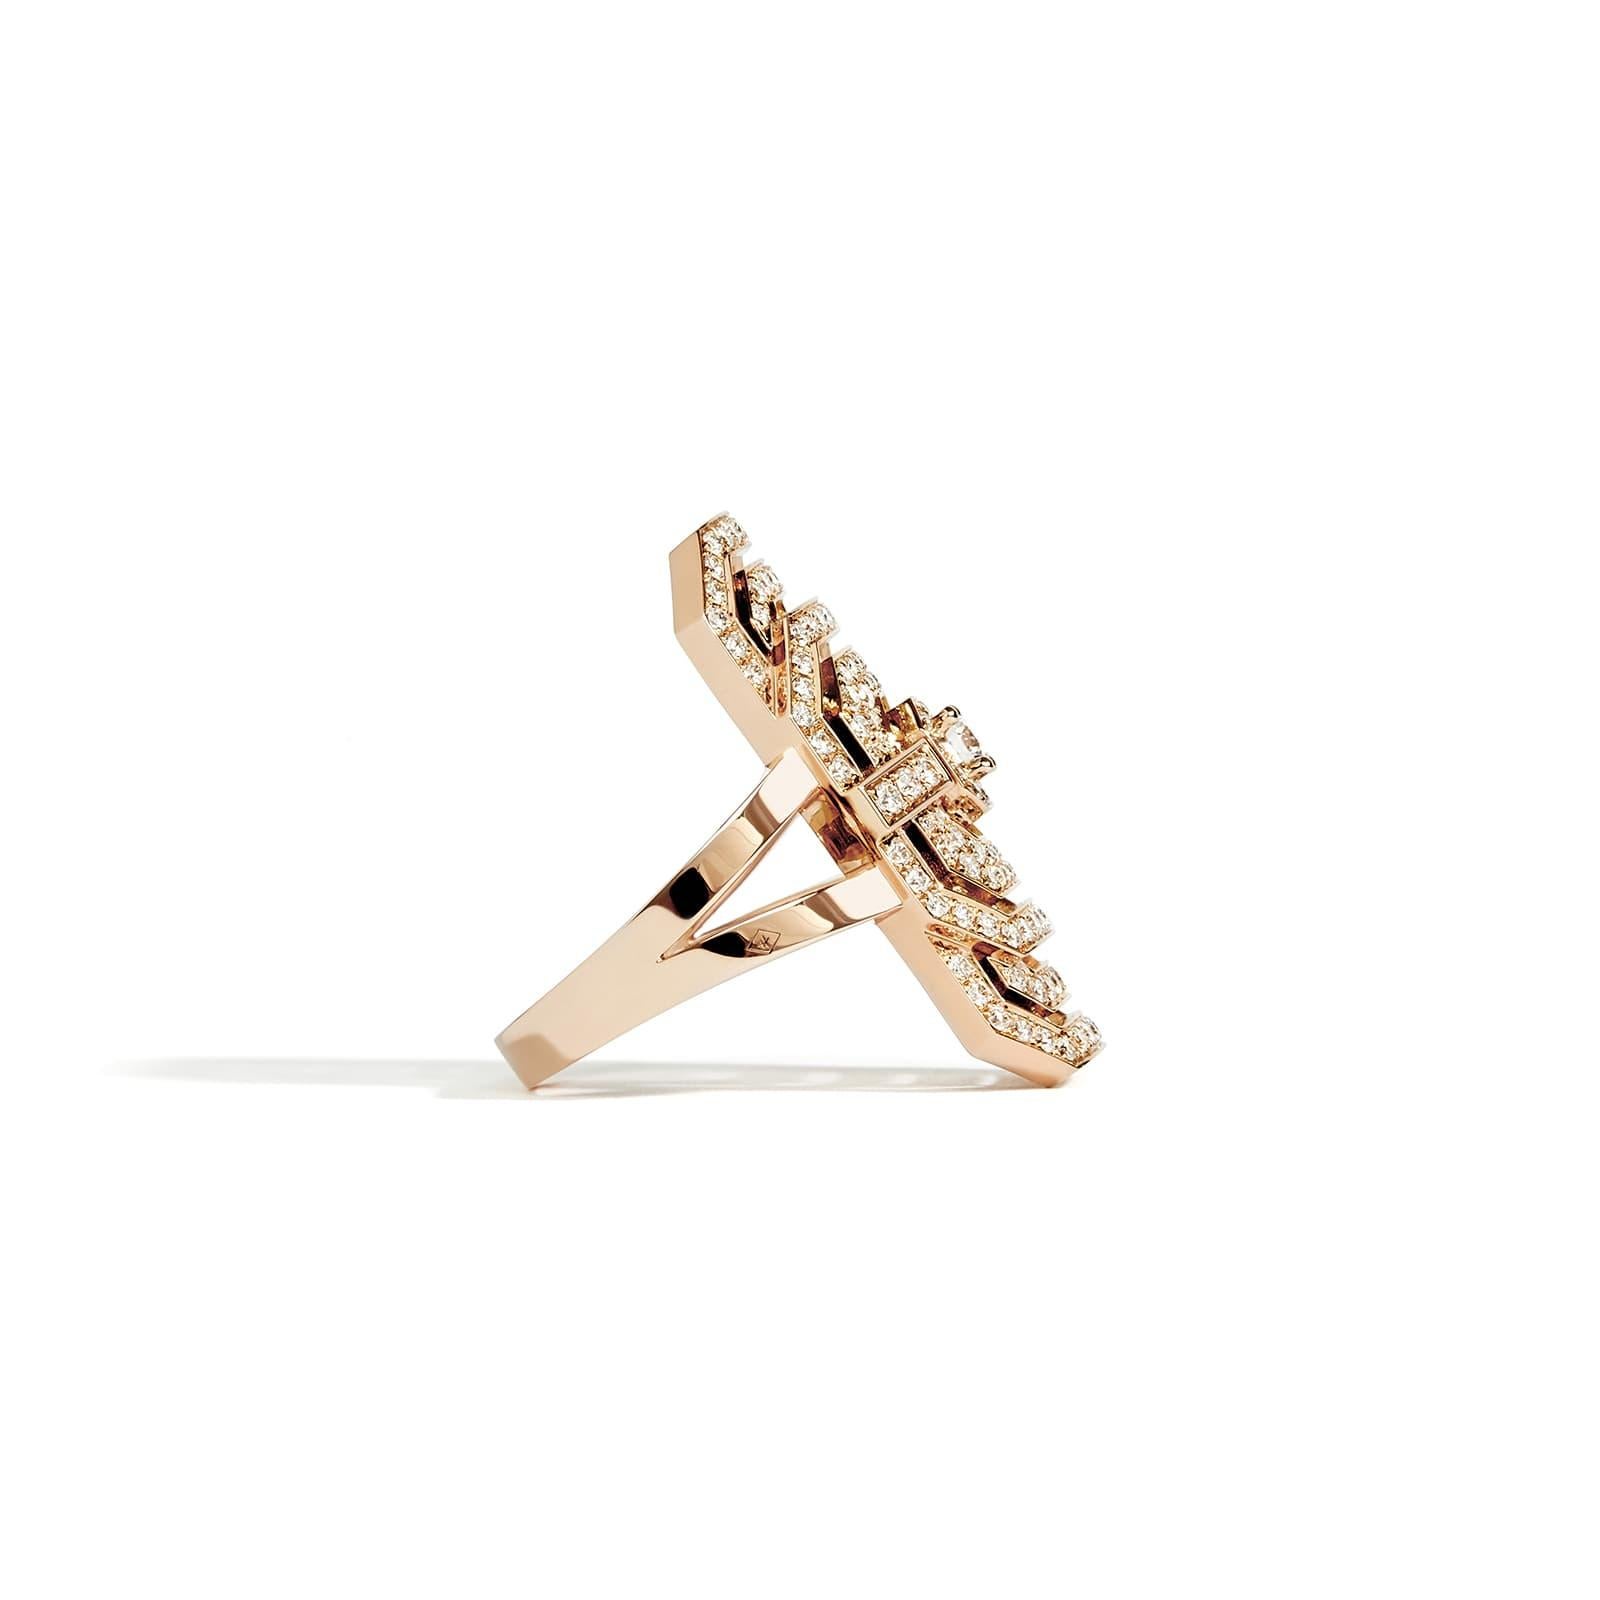 Ring My Way in 18K pink gold, set with 161 brilliant cut diamonds quality G-VS, for 1 carat. 

STATEMENT's first creation, the My Way ring also exists in a 18K pink gold version, paved with 161 natural diamonds.

The iconic My Way collection